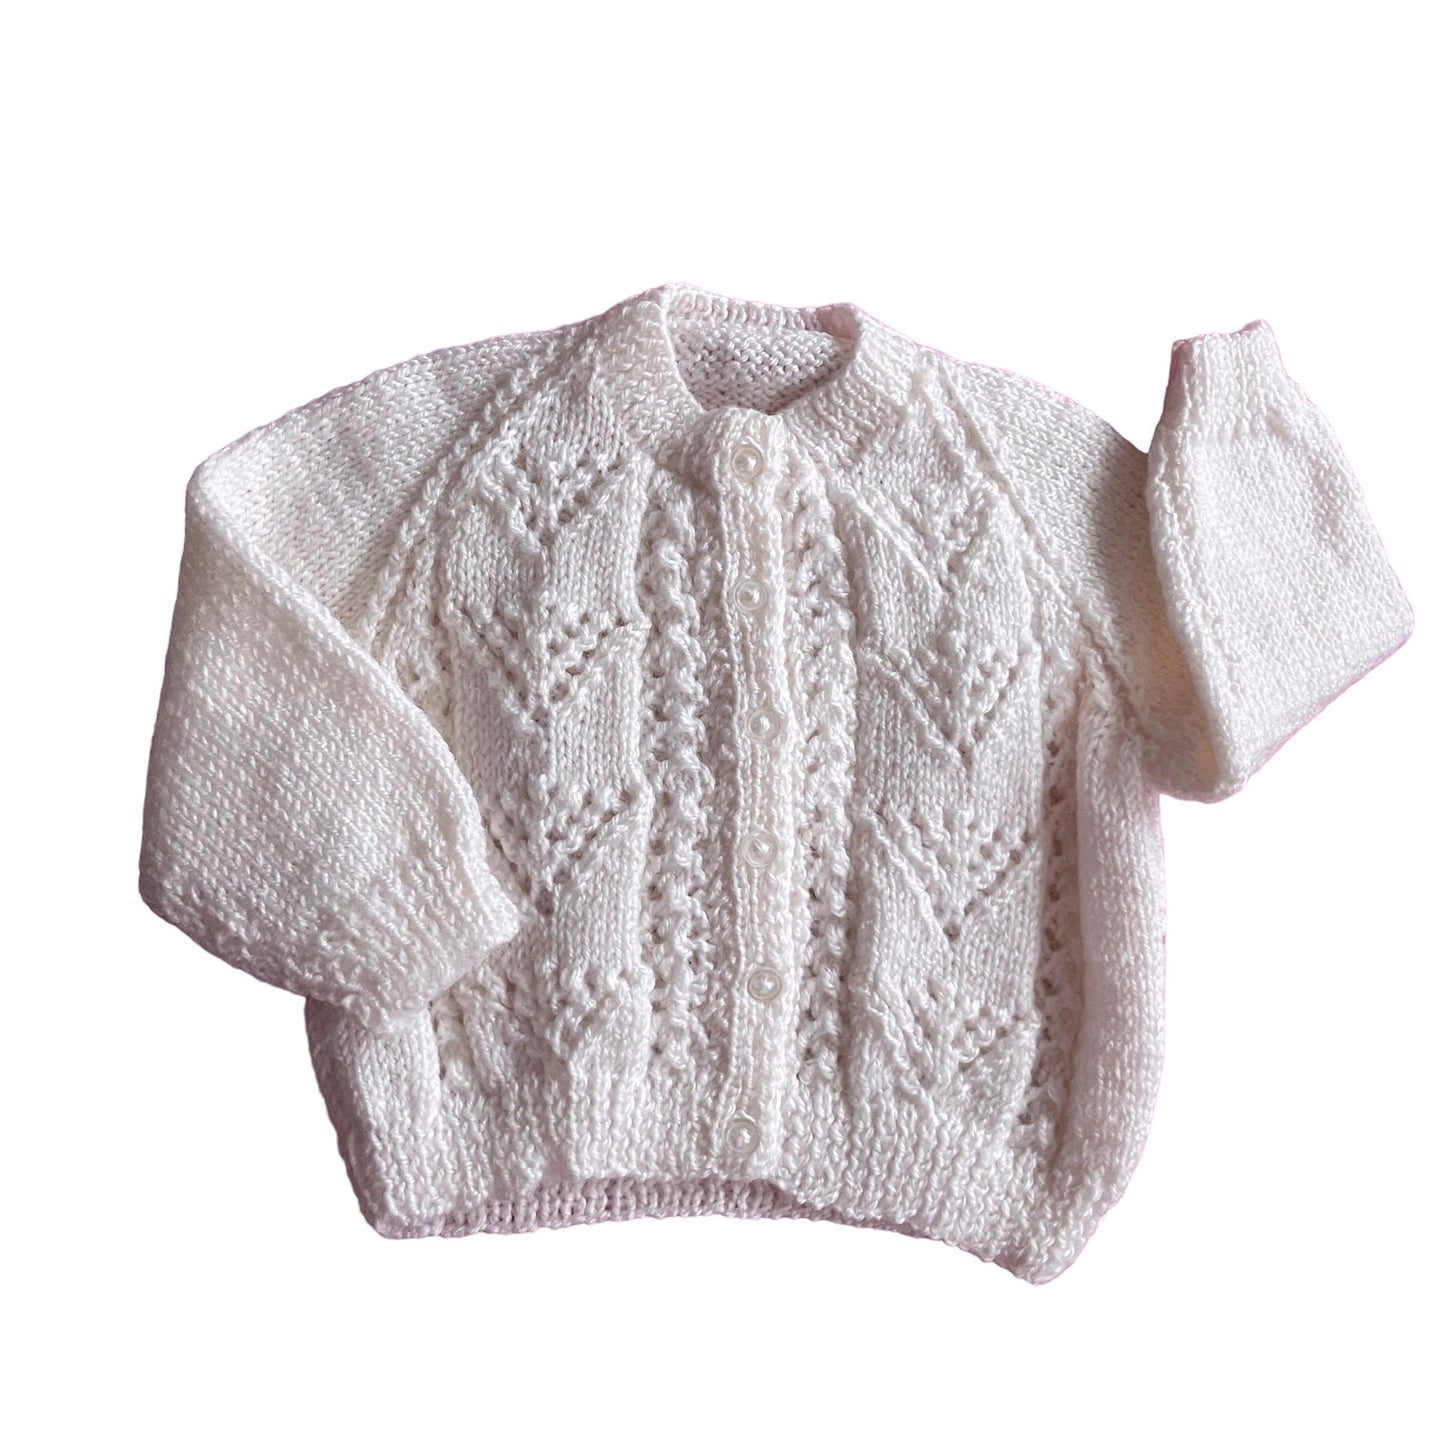 Vintage White Knitted Cardigan 0-6 Months